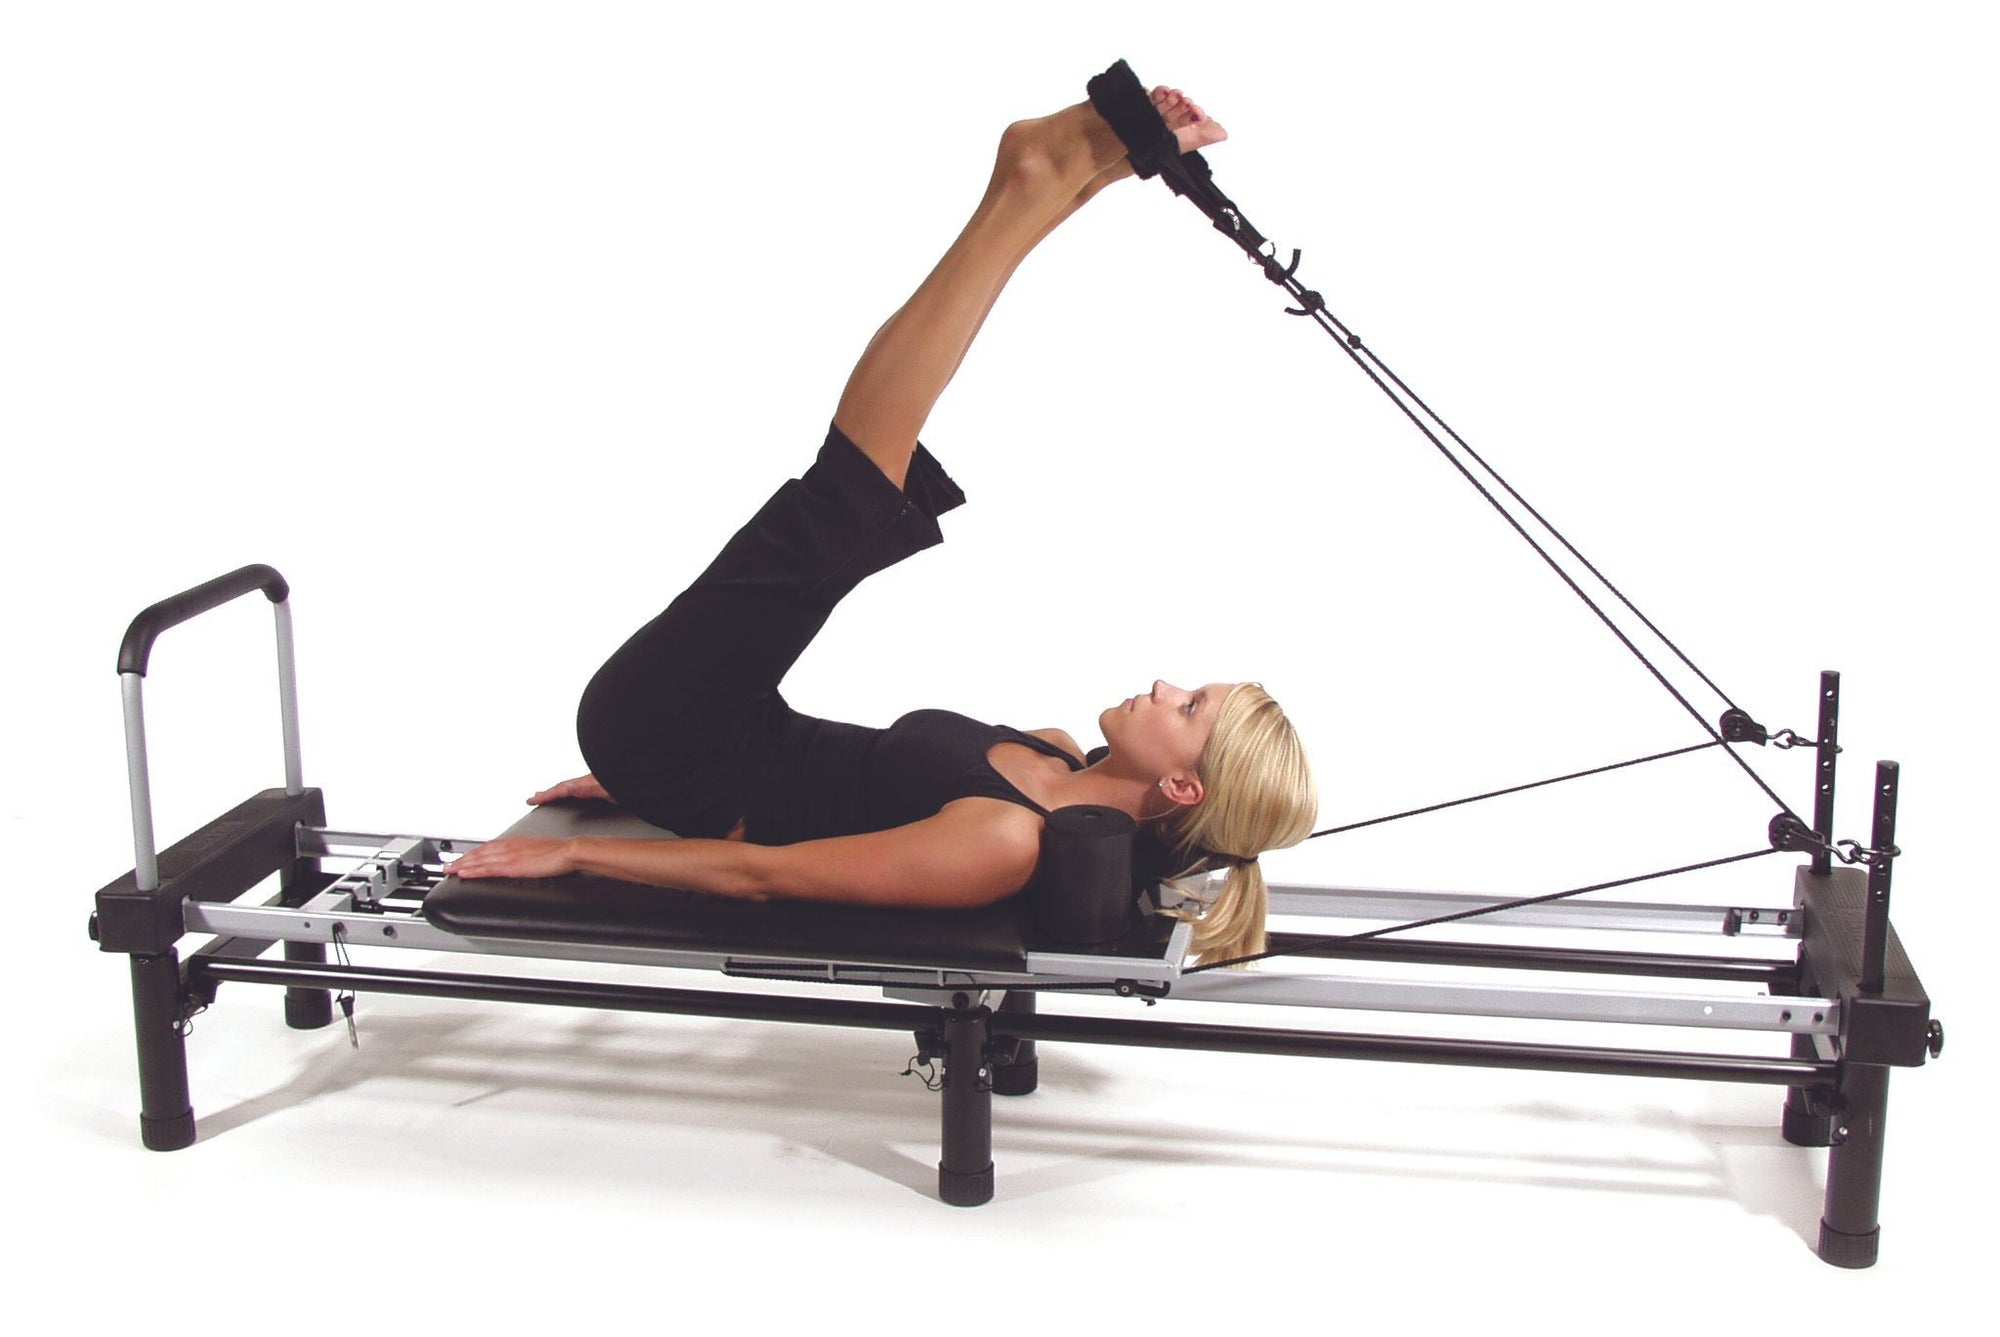 Get Your Body Into Shape With This AeroPilates Reformer For The New Year